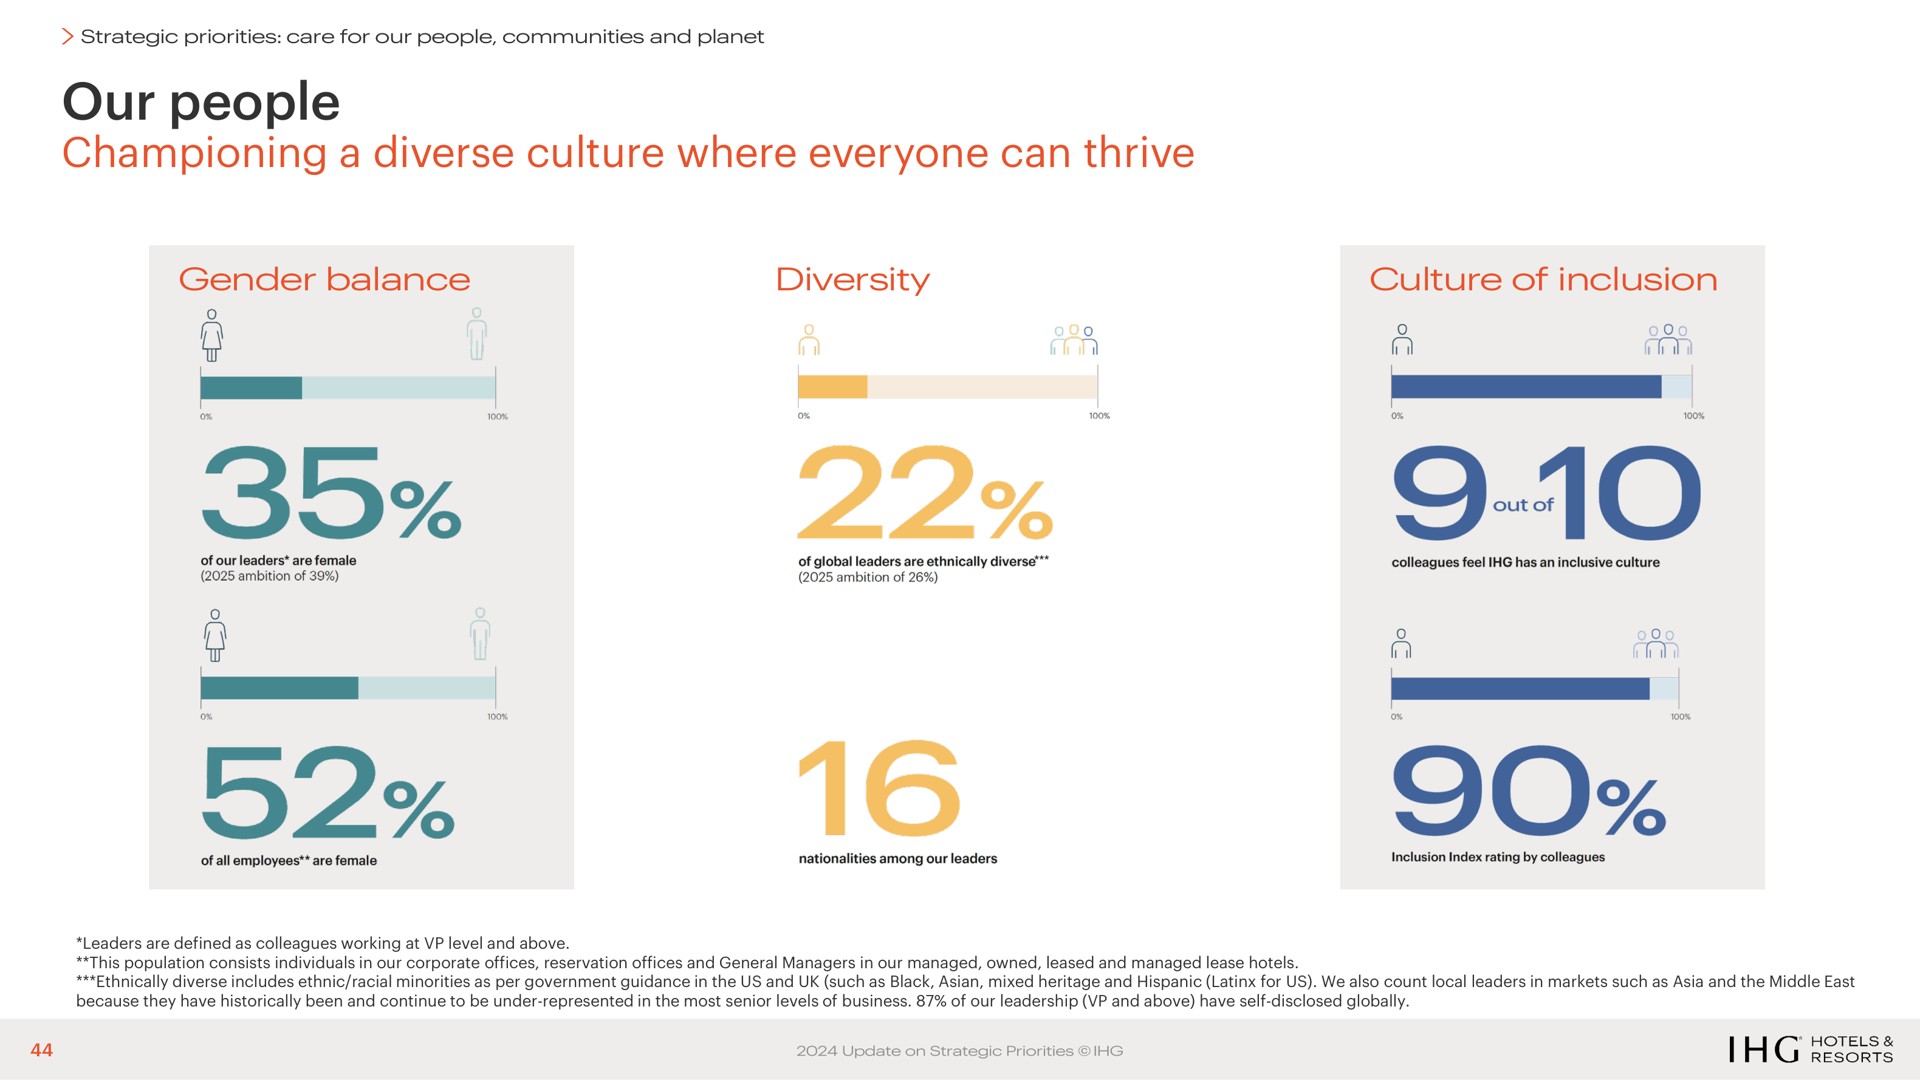 our people championing a diverse culture where everyone can thrive | IHG Hotels